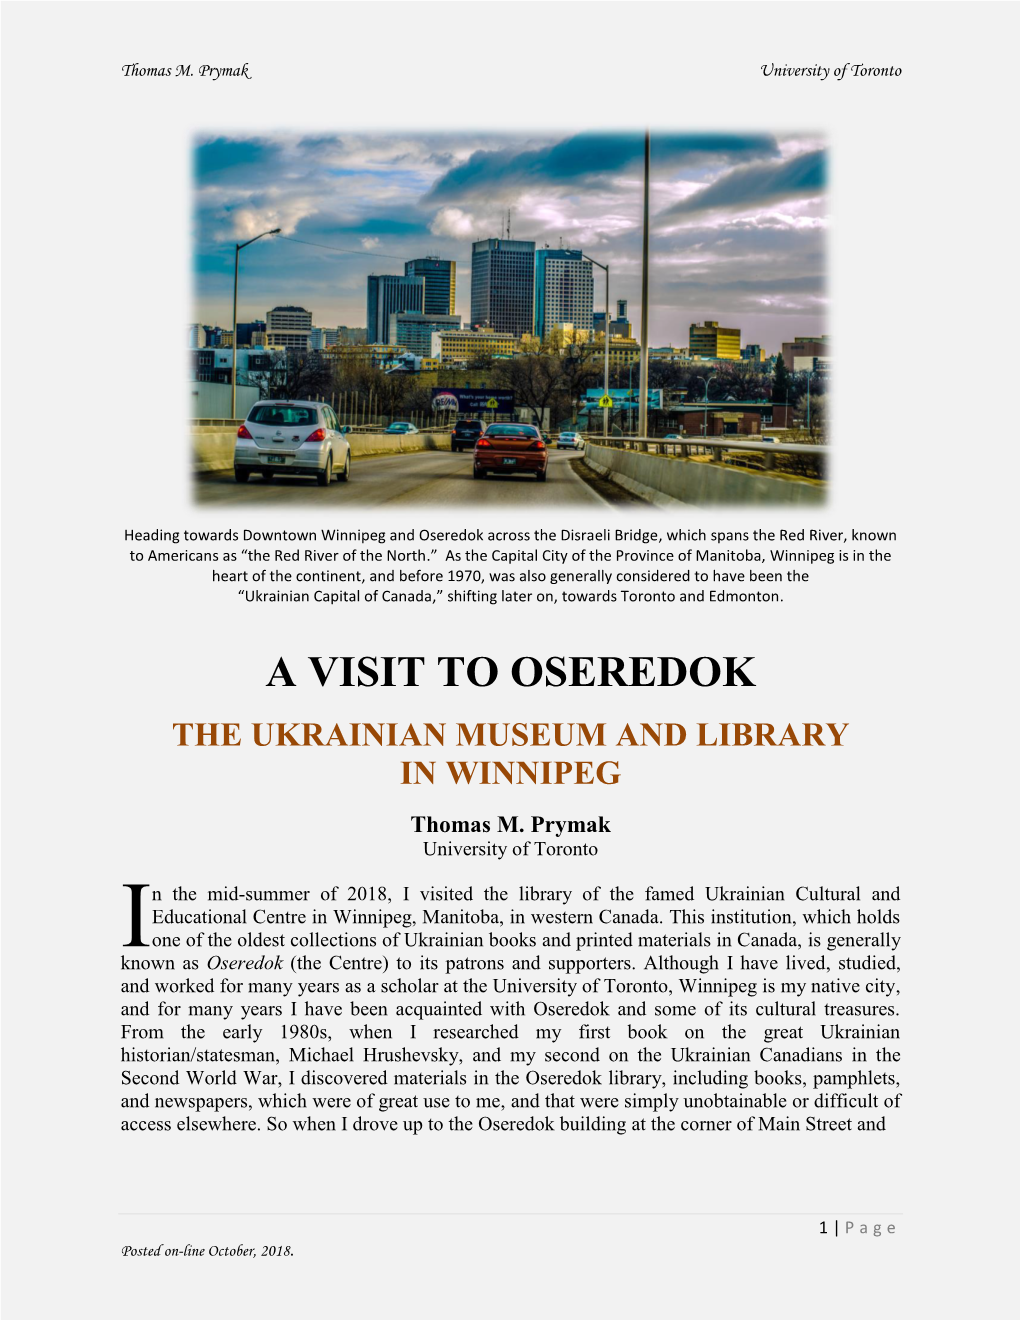 A Visit to Oseredok the Ukrainian Museum and Library in Winnipeg